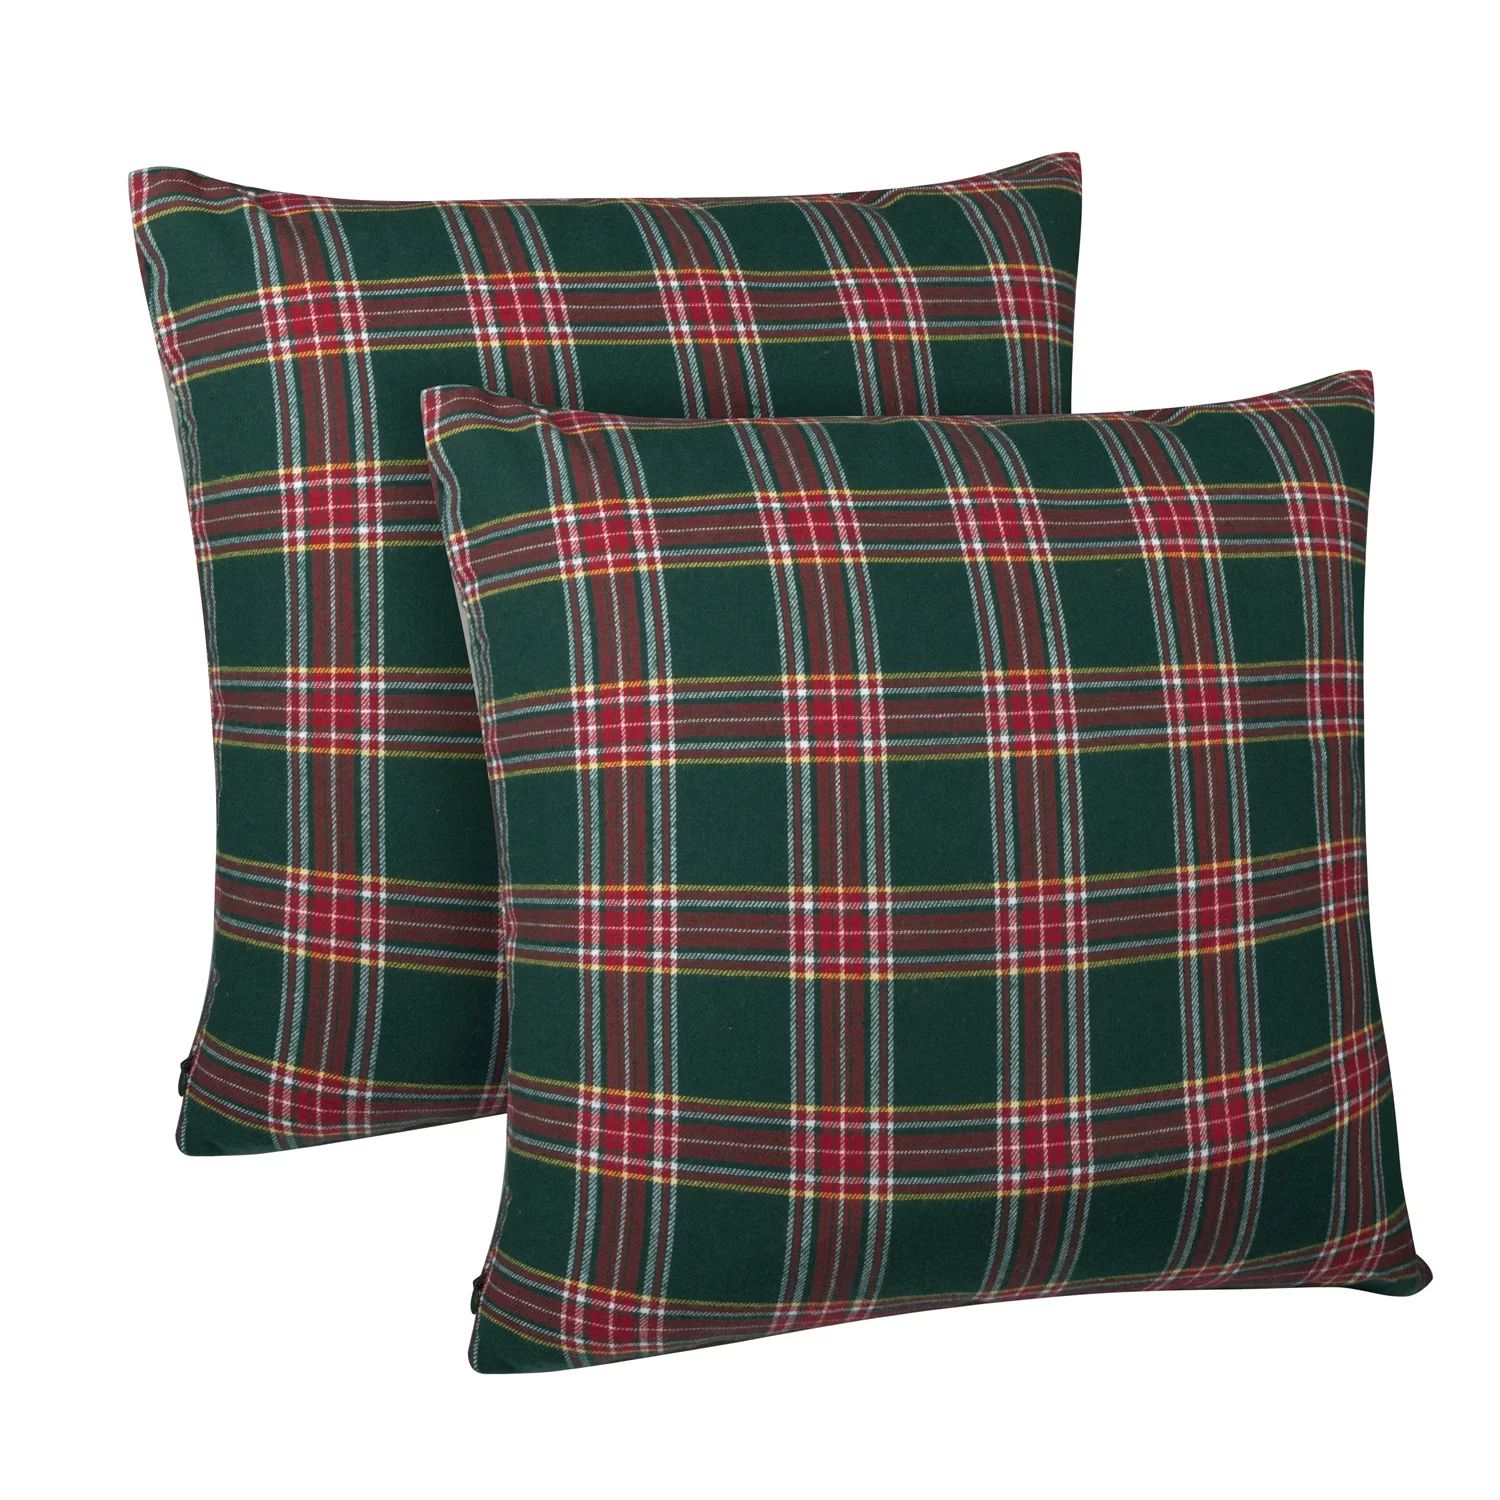 Set of 2 Red Plaid Christmas Decorative Throw Pillow Covers 18" x 18" for Gift | Walmart (US)